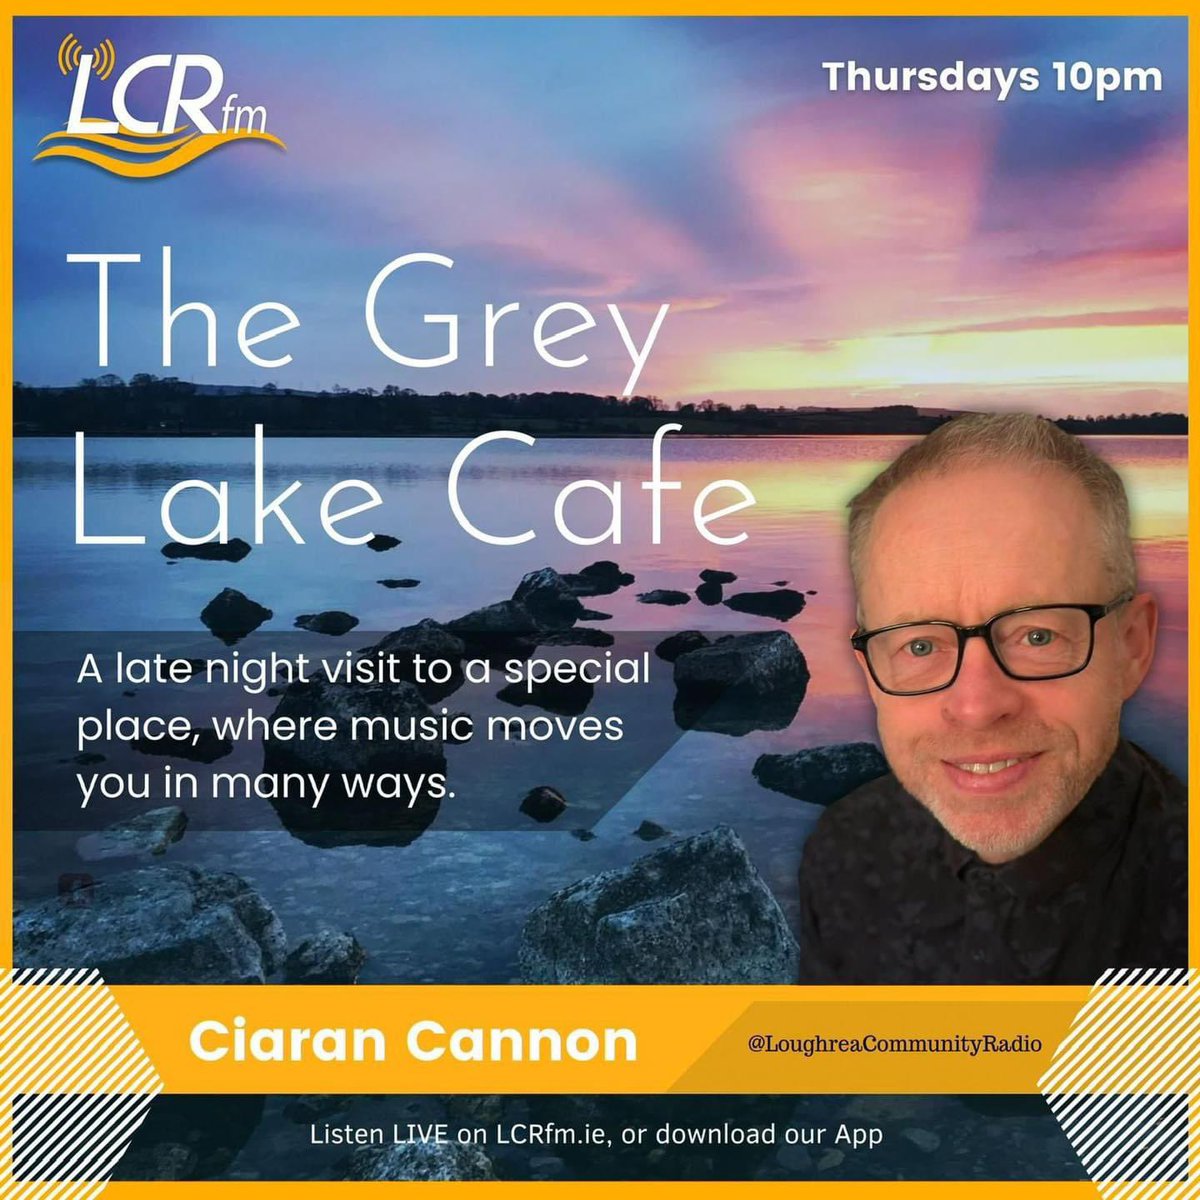 Music from @JoachimCooder, @TomBaxterMusic, @macdaraof and many more on #TheGreyLakeCafe @LoughreaRadio tomorrow night, 10.00pm. Listen on lcrfm.ie or on your Alexa (“Alexa enable Loughrea Community Radio”) or on our superb app here; apps.apple.com/ie/app/lcrfm-1…